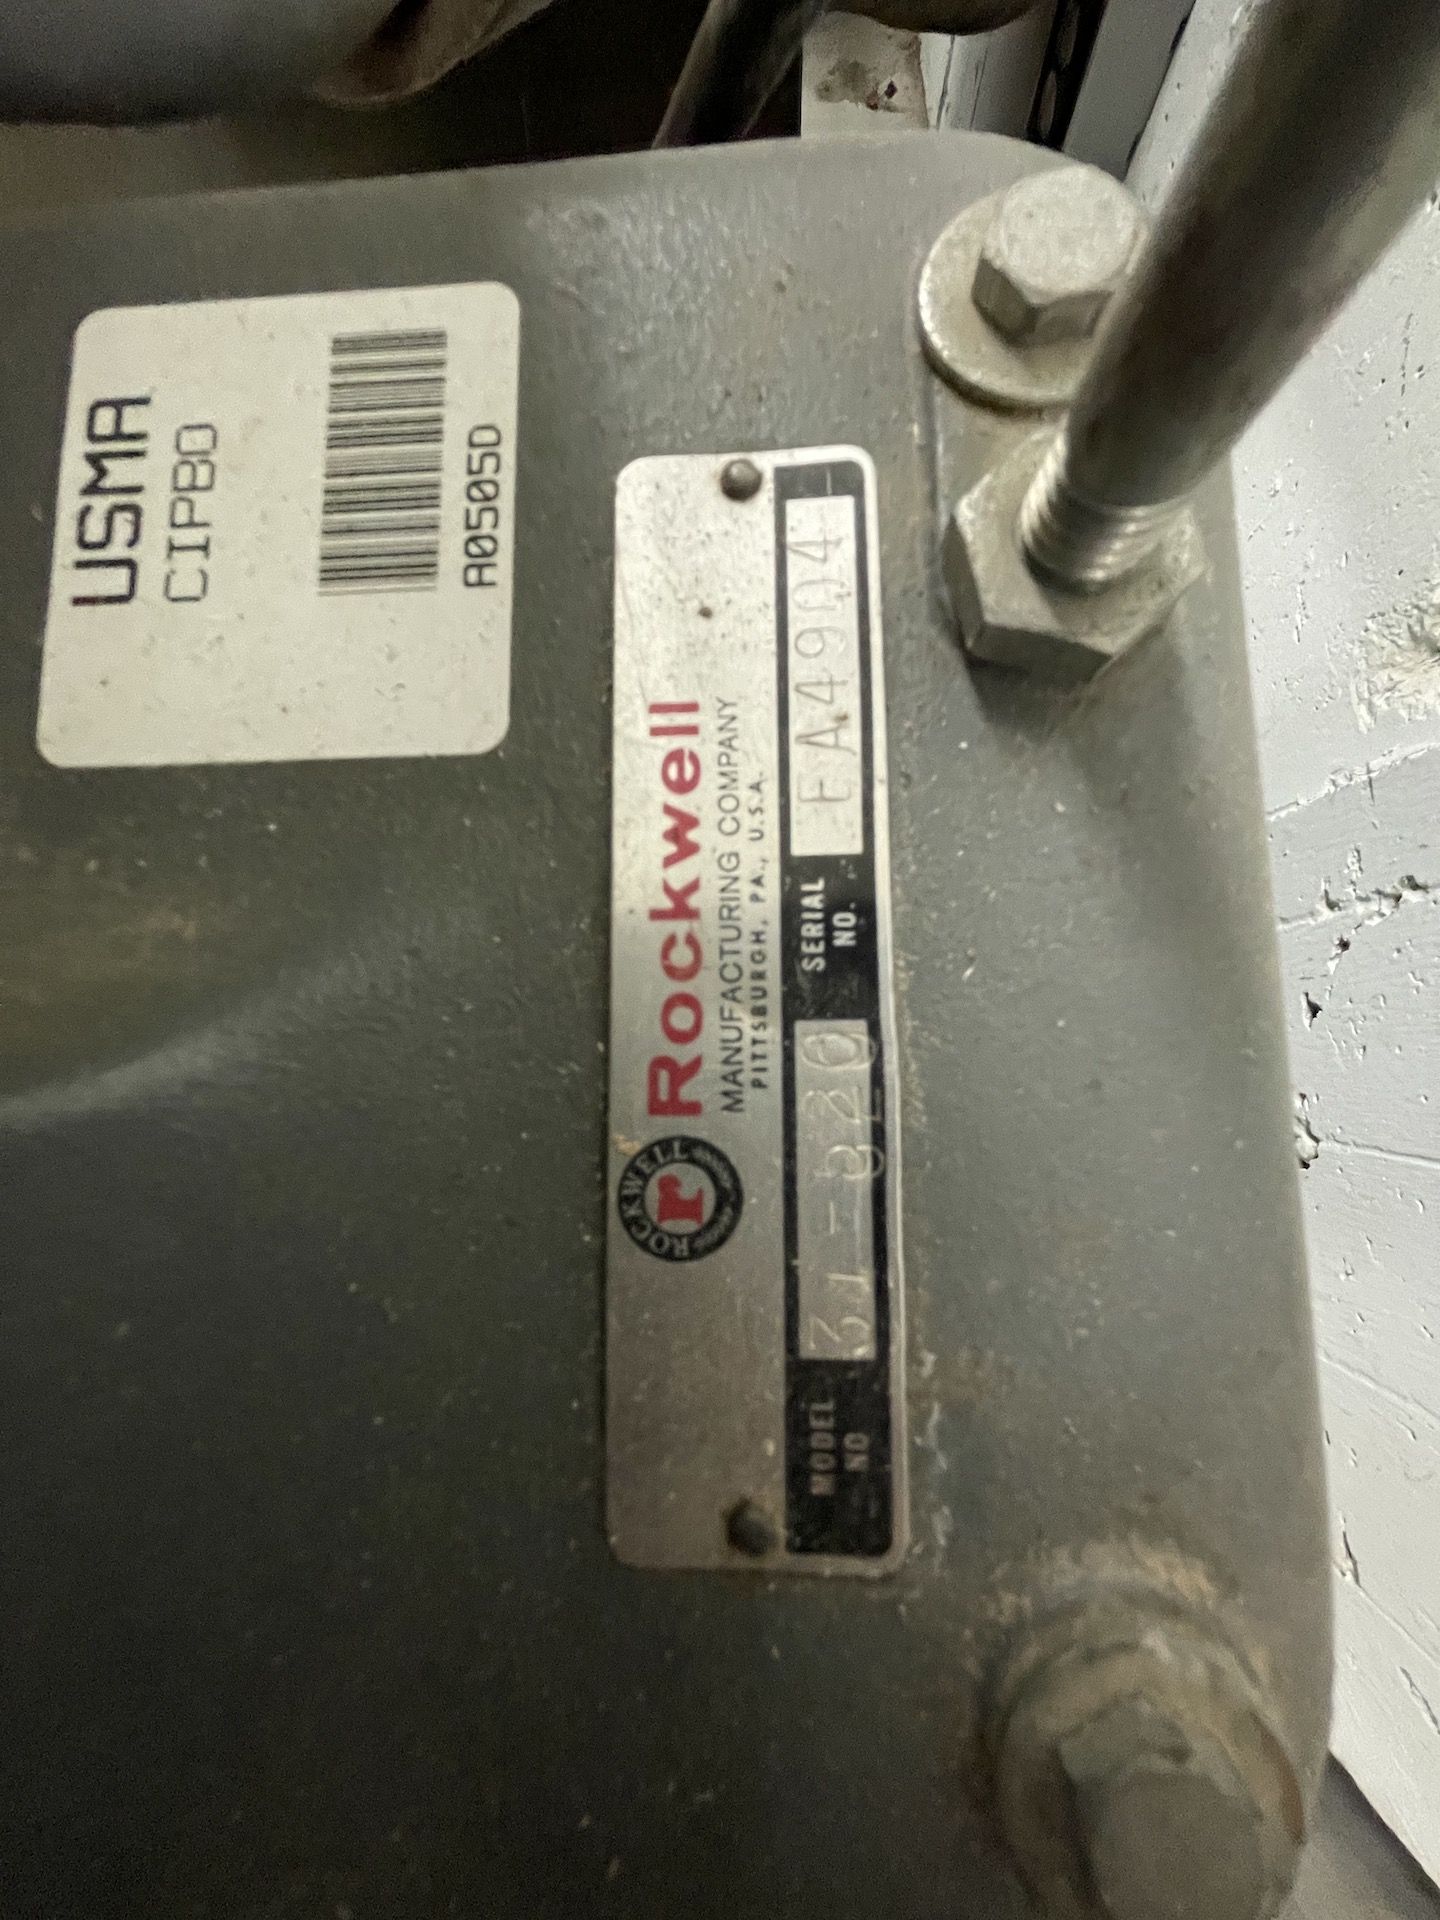 ROCKWELL BELT SANDER, MODEL 31-520, S/N FA4904 (Non-Negotiable Rigging, Packaging and Loading - Image 4 of 10